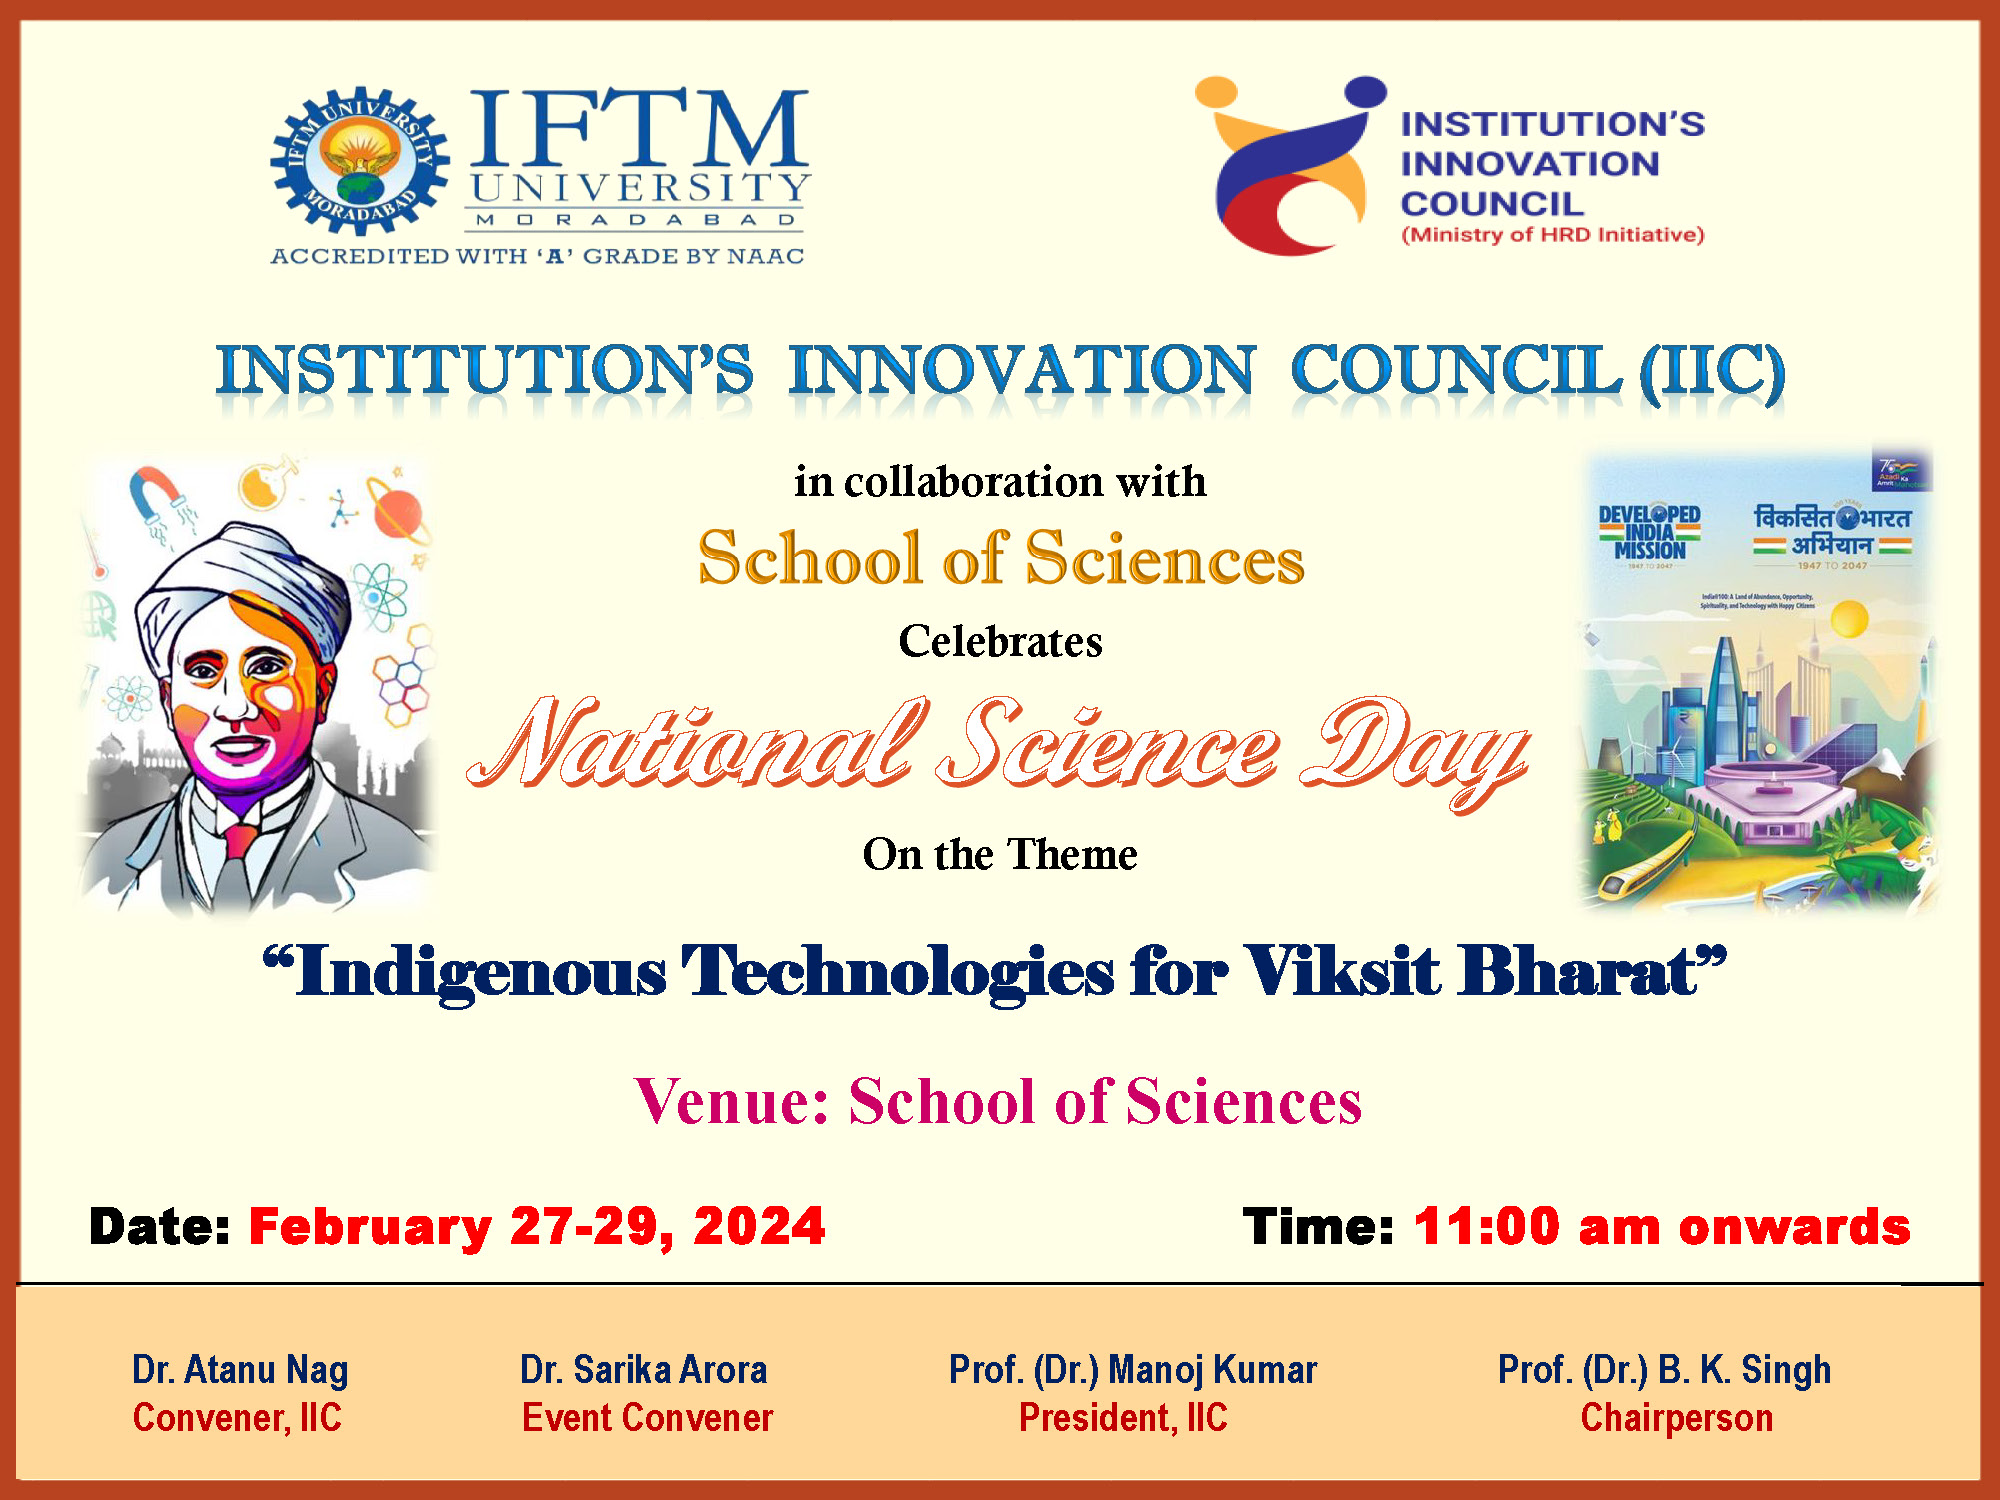 Celebration of National Science Day on the Theme: Indigenous Technologies for Viksit Bharat